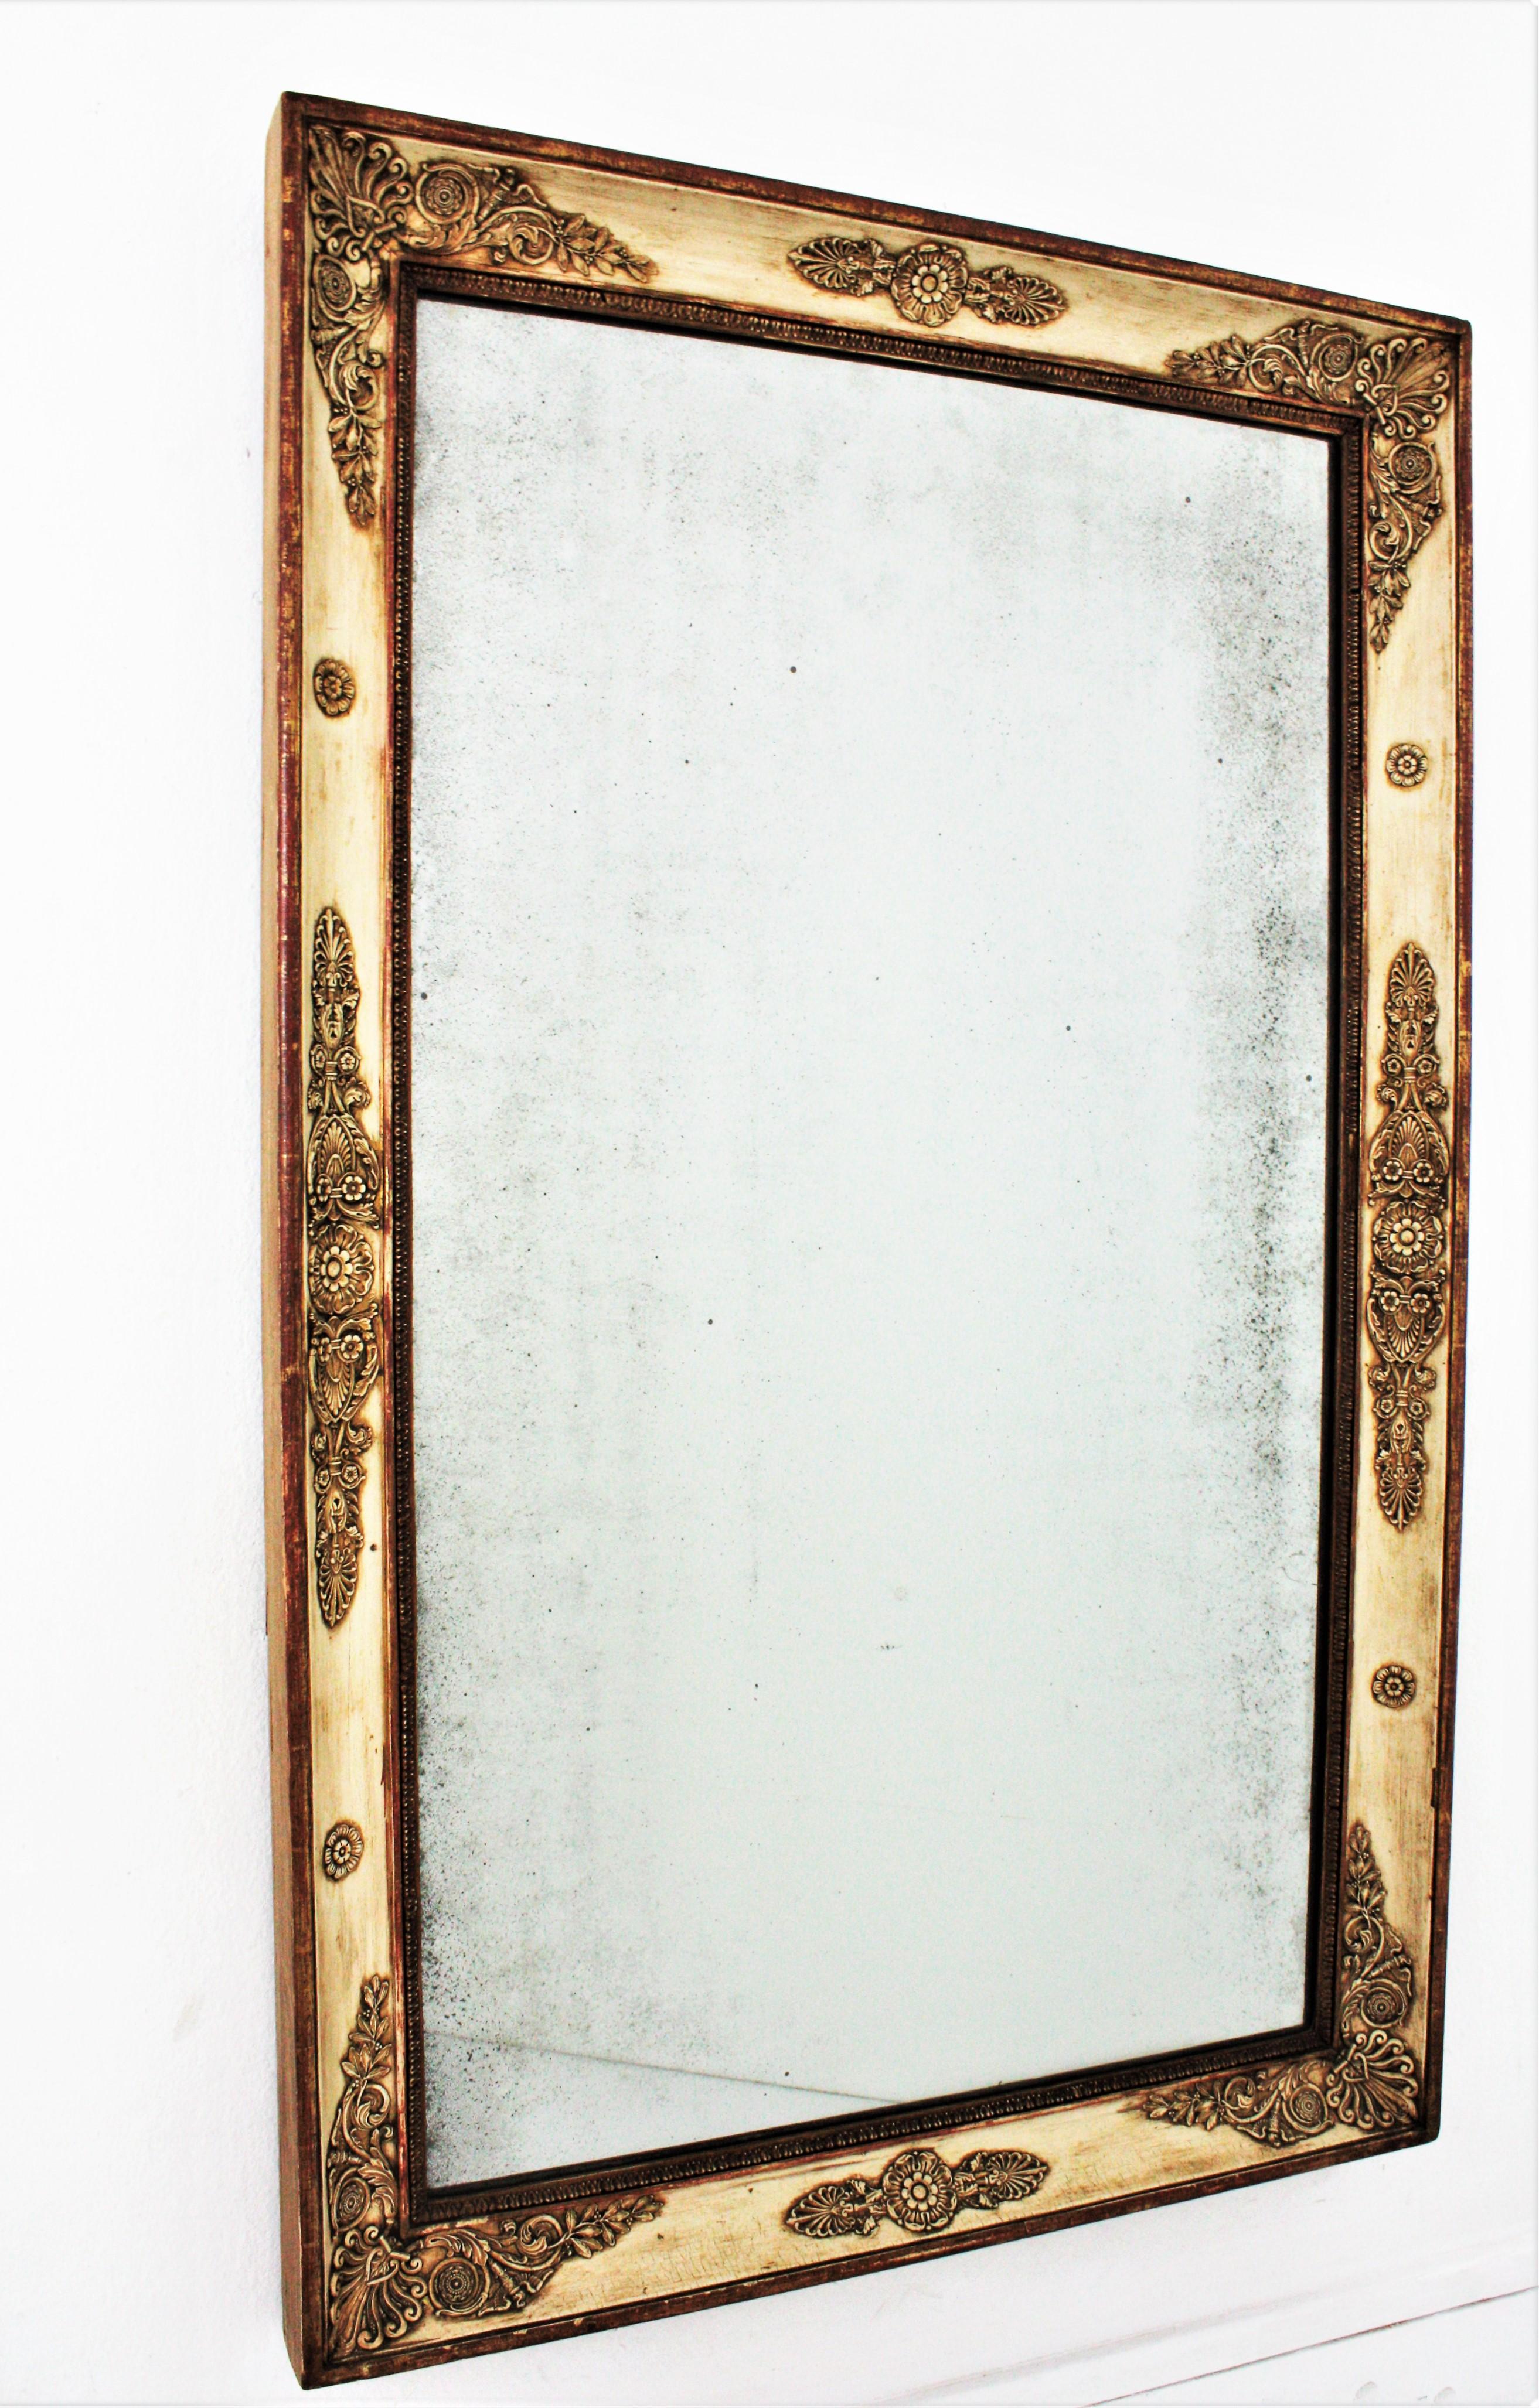 Large French Empire Parcel-Gilt and Beige Rectangular Mirror For Sale 5